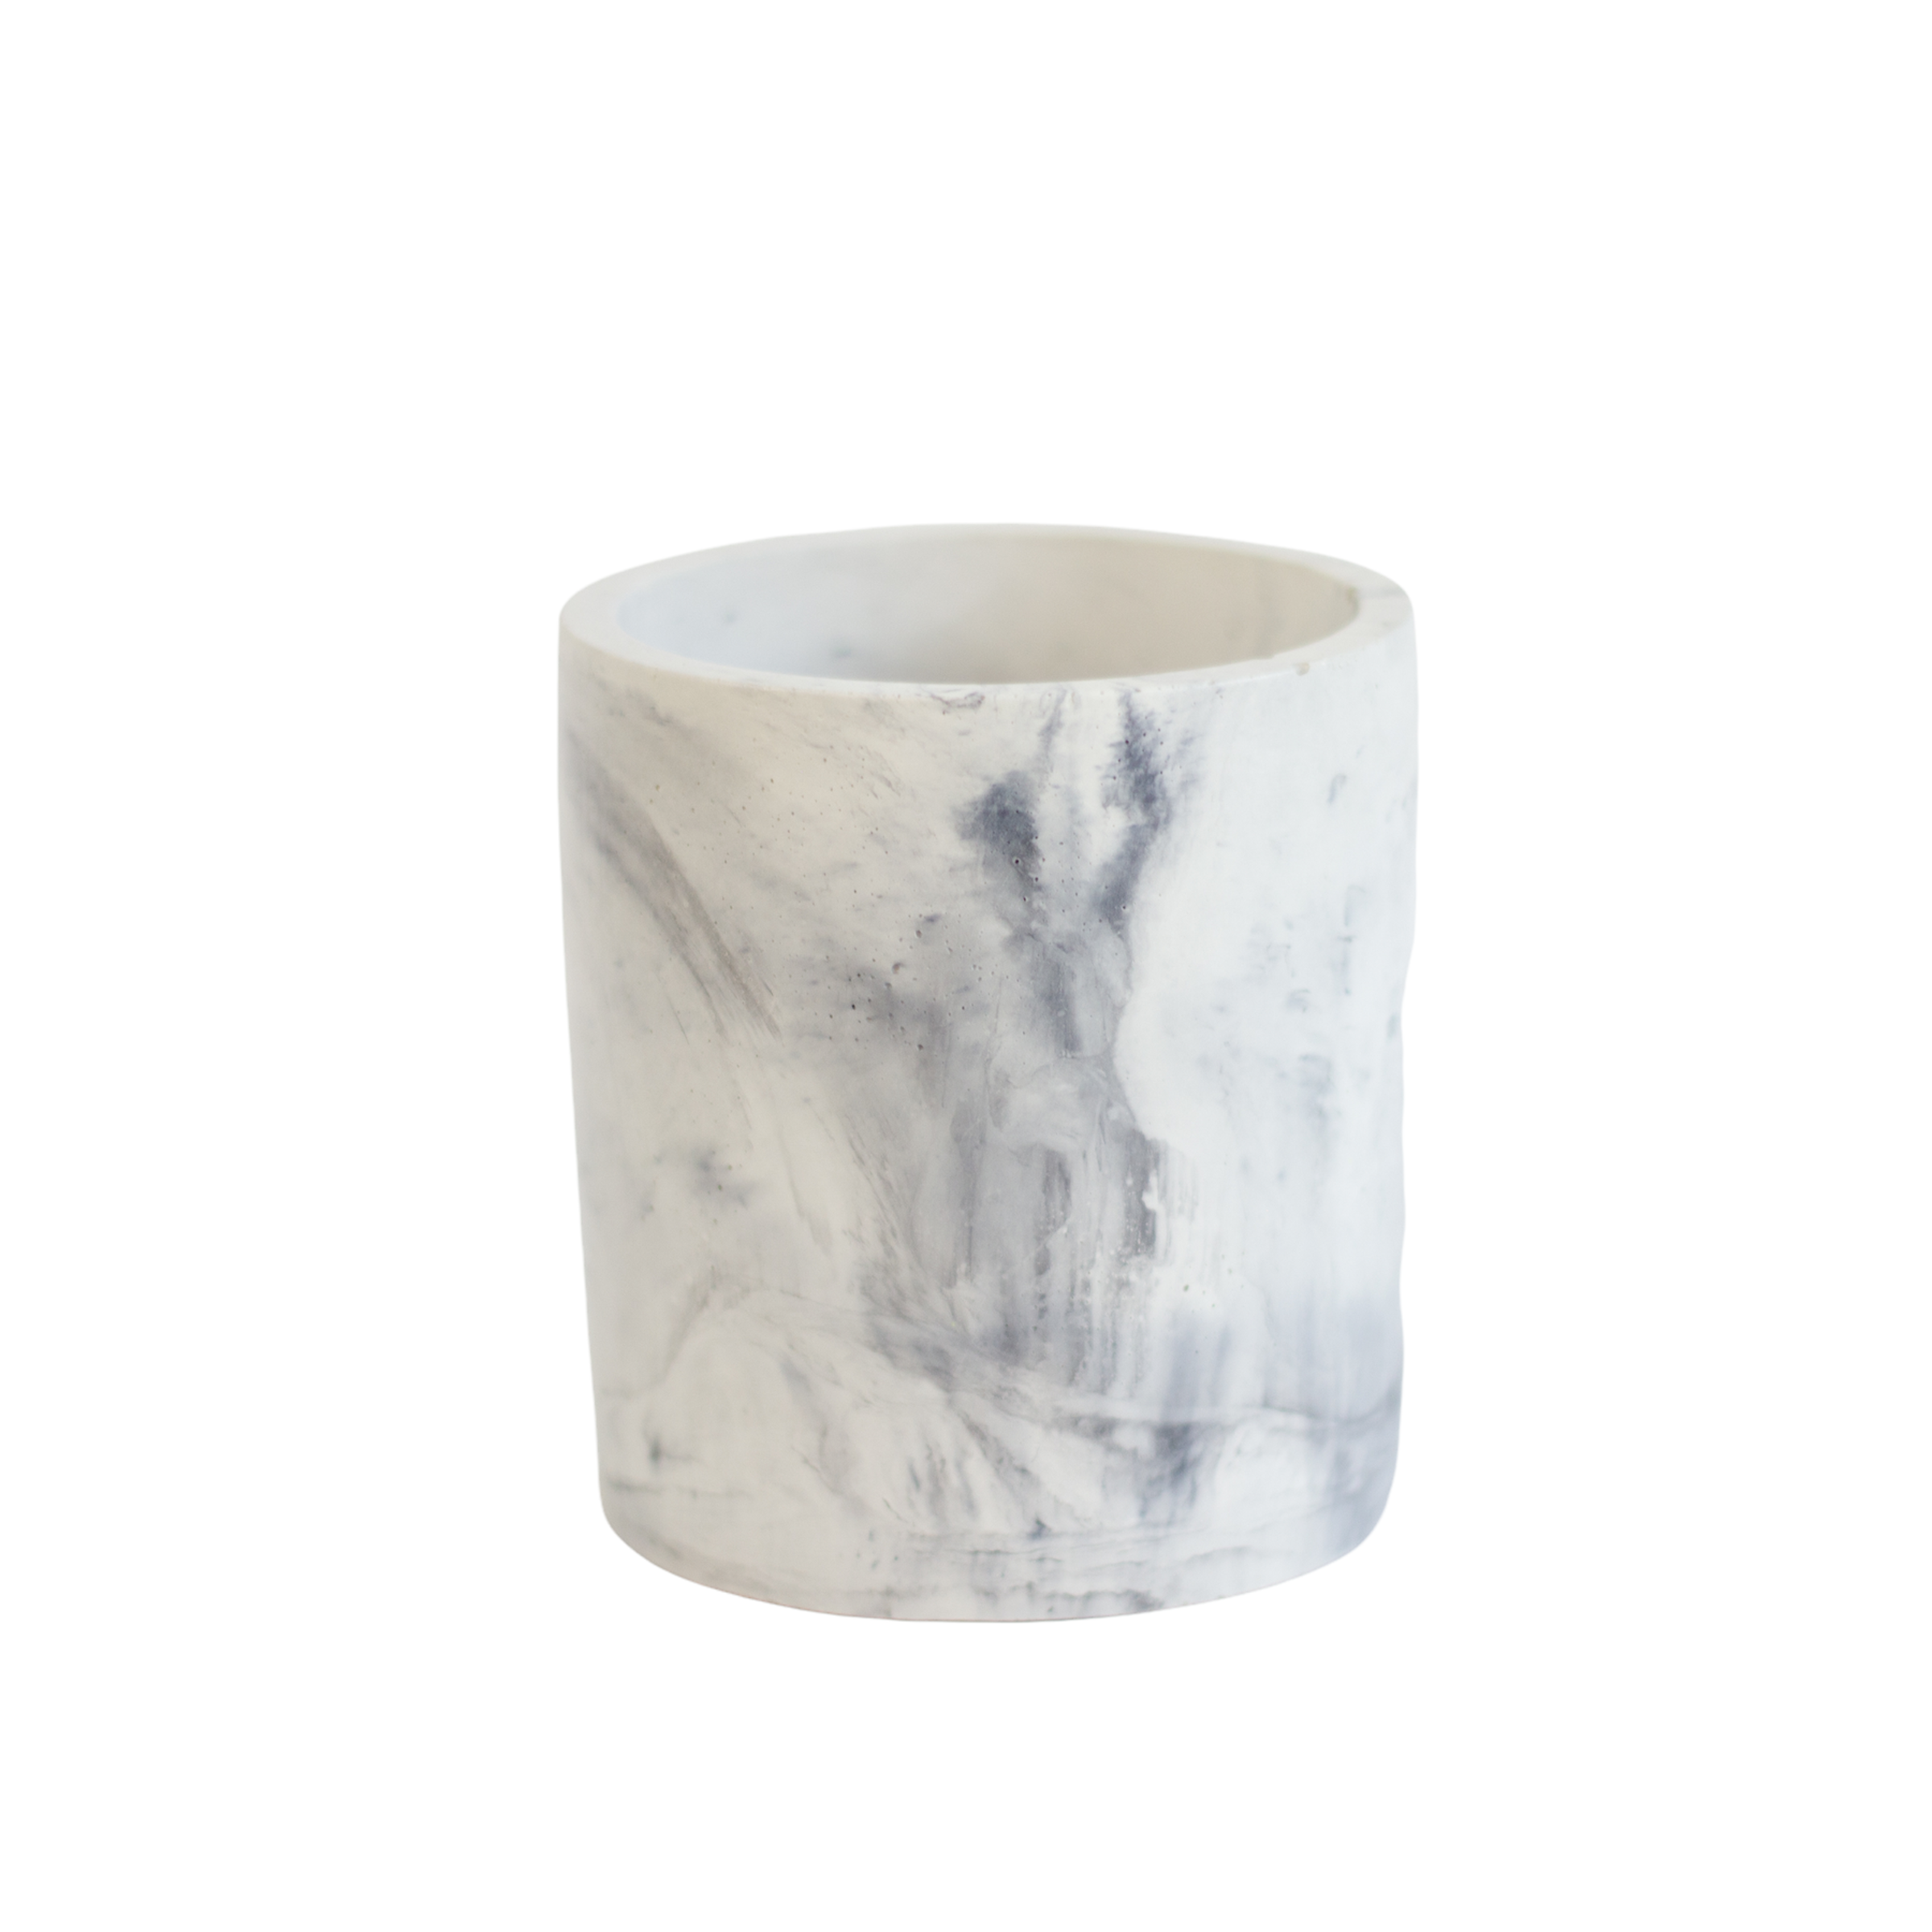 $45, large marble concrete cylinder